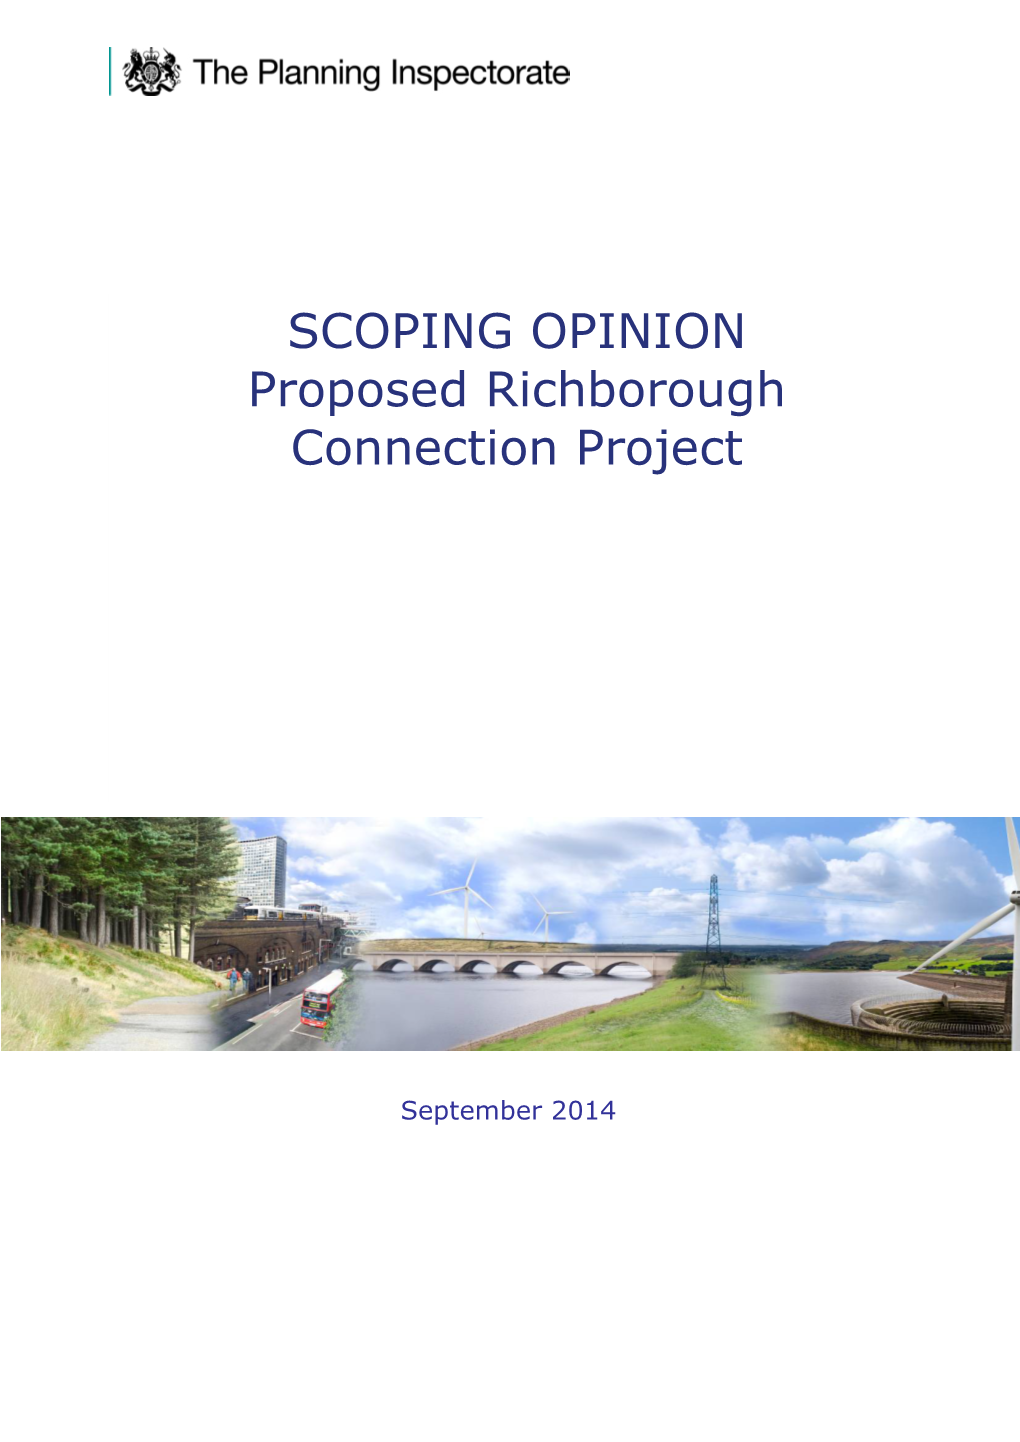 SCOPING OPINION Proposed Richborough Connection Project